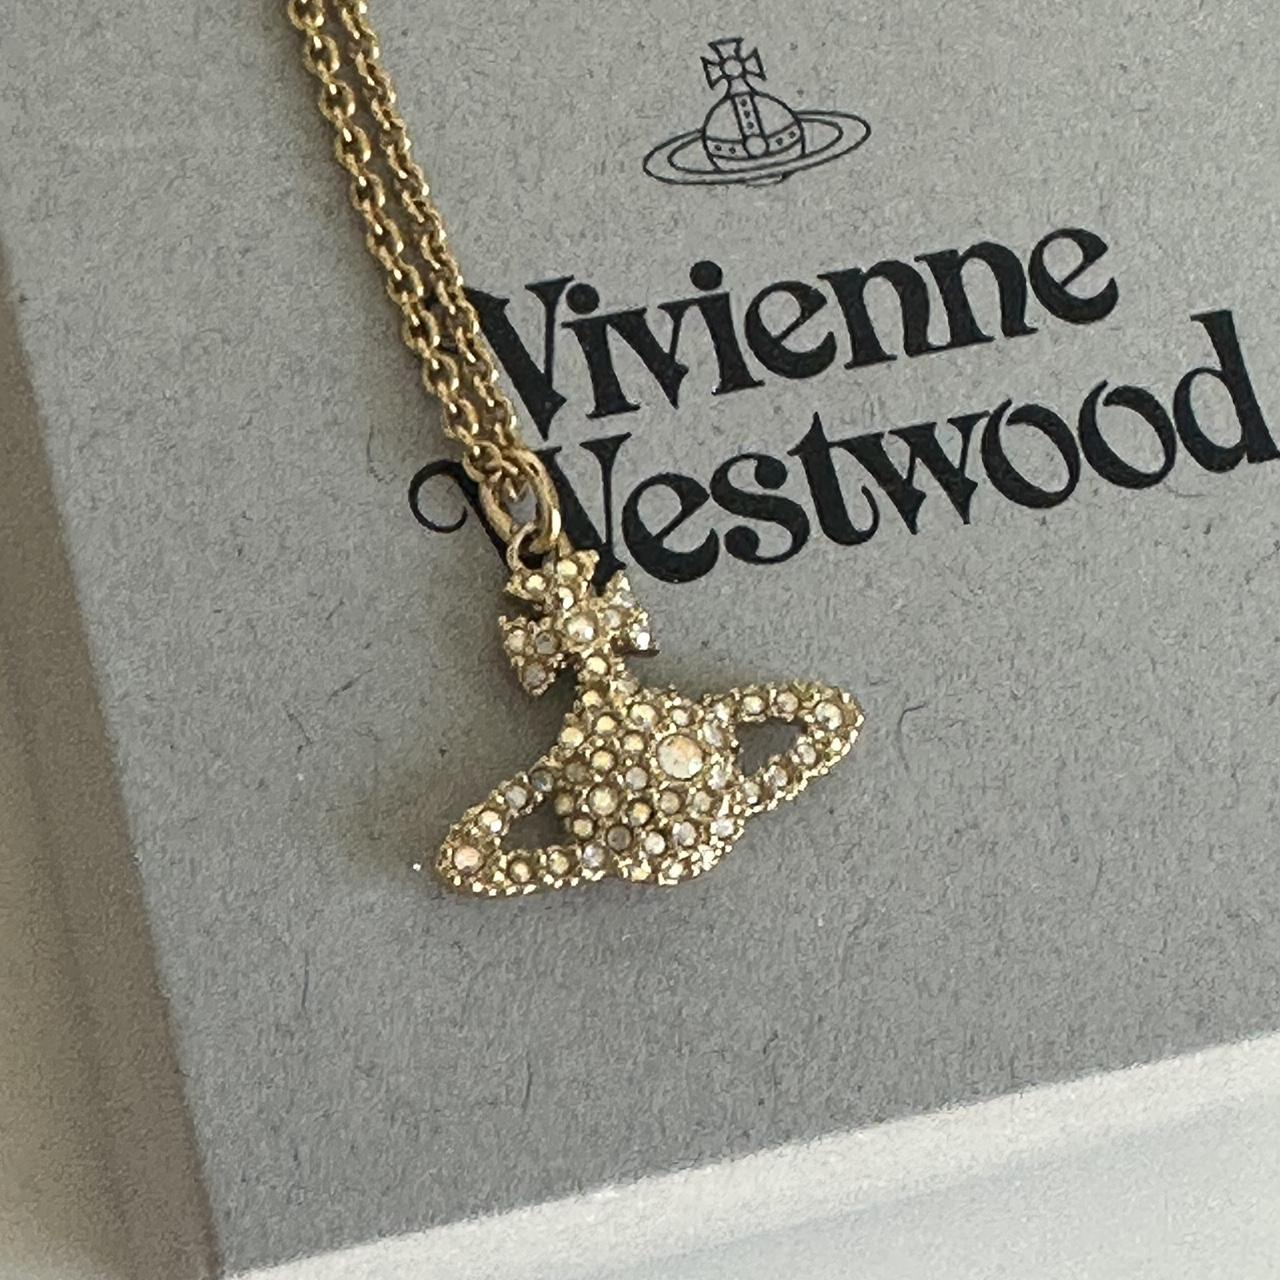 Maudes the Jewellers - G R A C E Send your style credentials sky high with  these Vivienne Westwood Grace must-haves 💫 Bracelet - £95 Necklace - £100  https://maudesjewellers.co.uk/search?type=product&q=Vivienne+Westwood+grace  #maudesjewellers ...